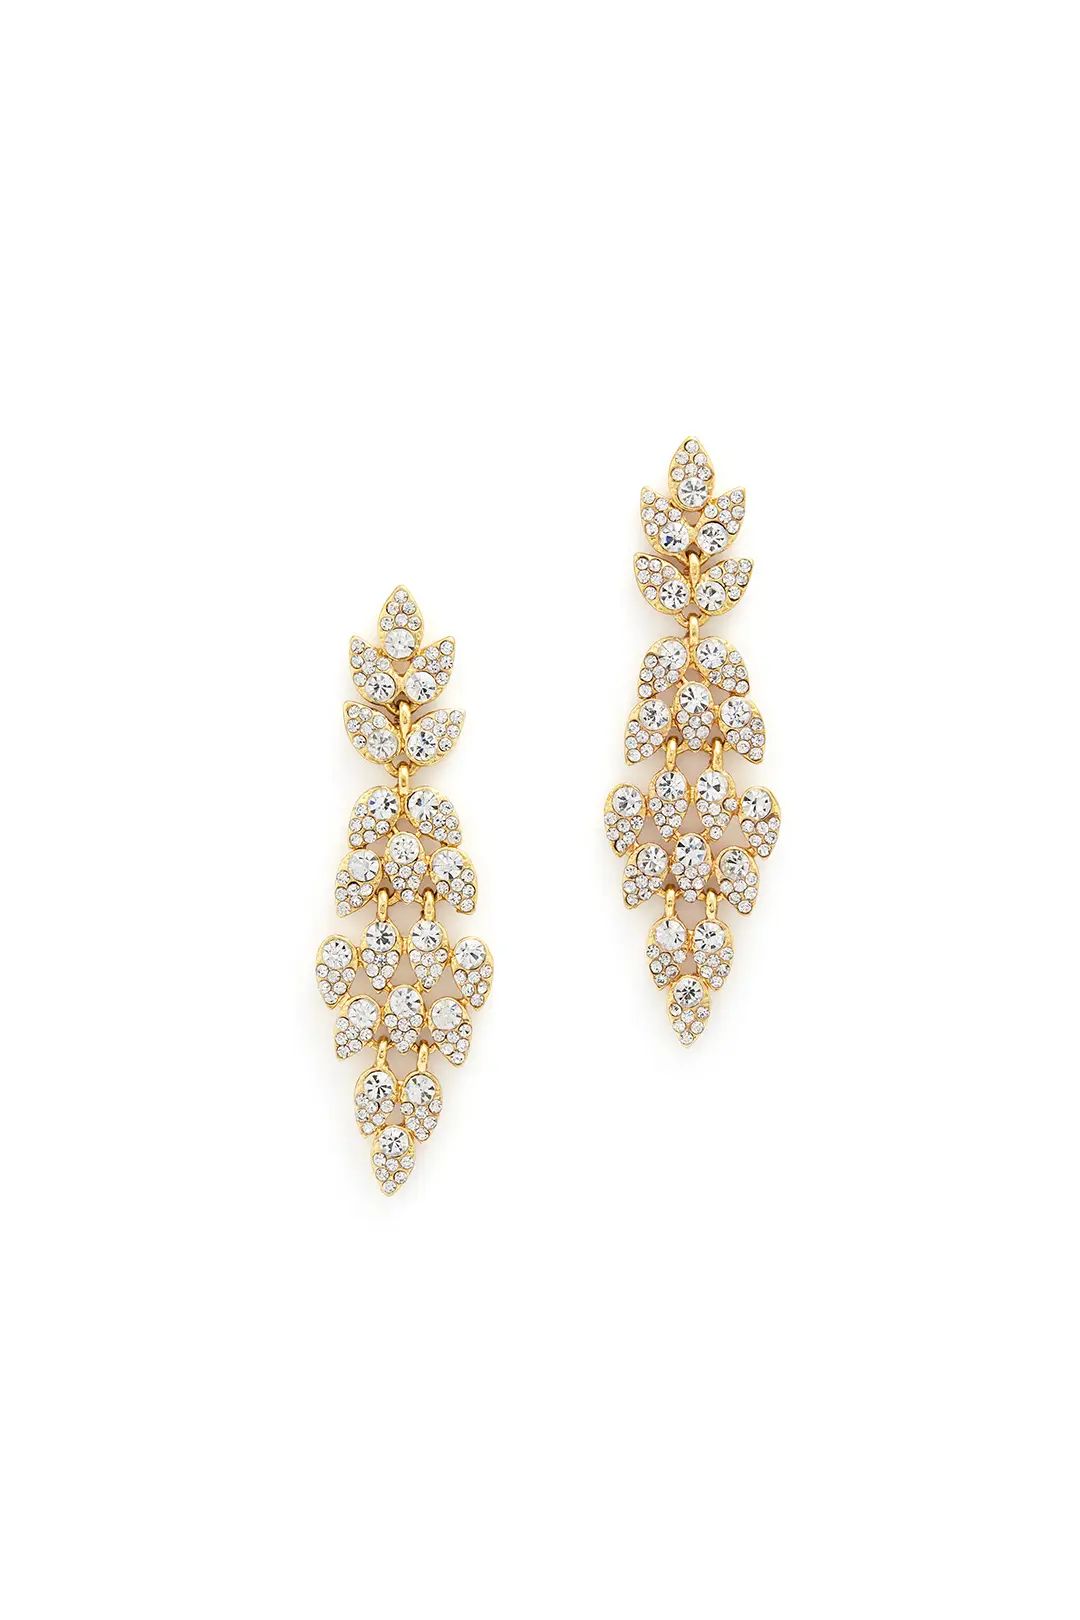 Slate & Willow Accessories Stars Align Earrings | Rent The Runway